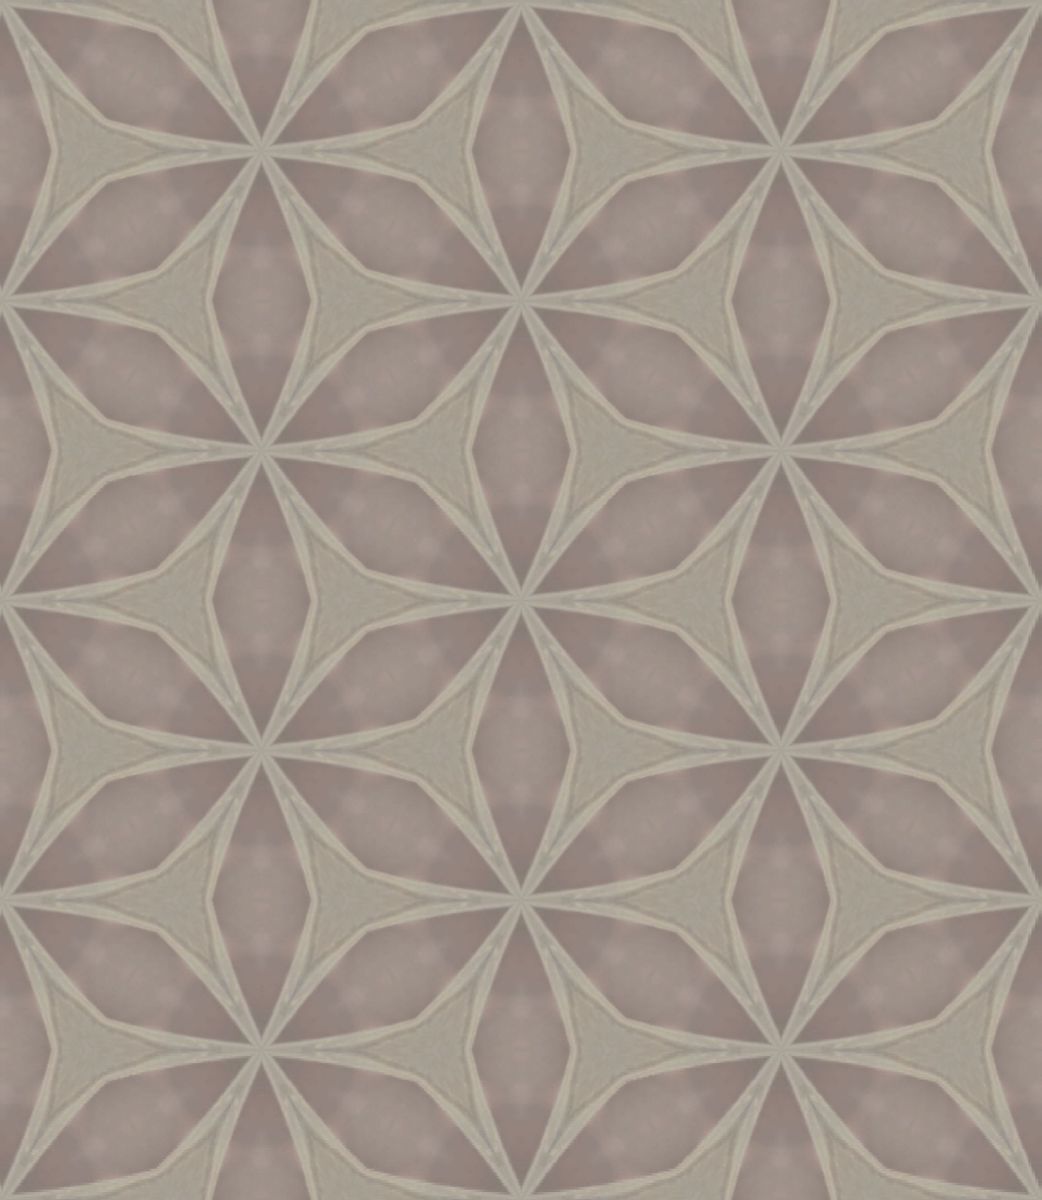 Geometric Wallpaper by Julia Clare Interiors for AUTHOR Interiors' collection of British-made luxury wallpapers